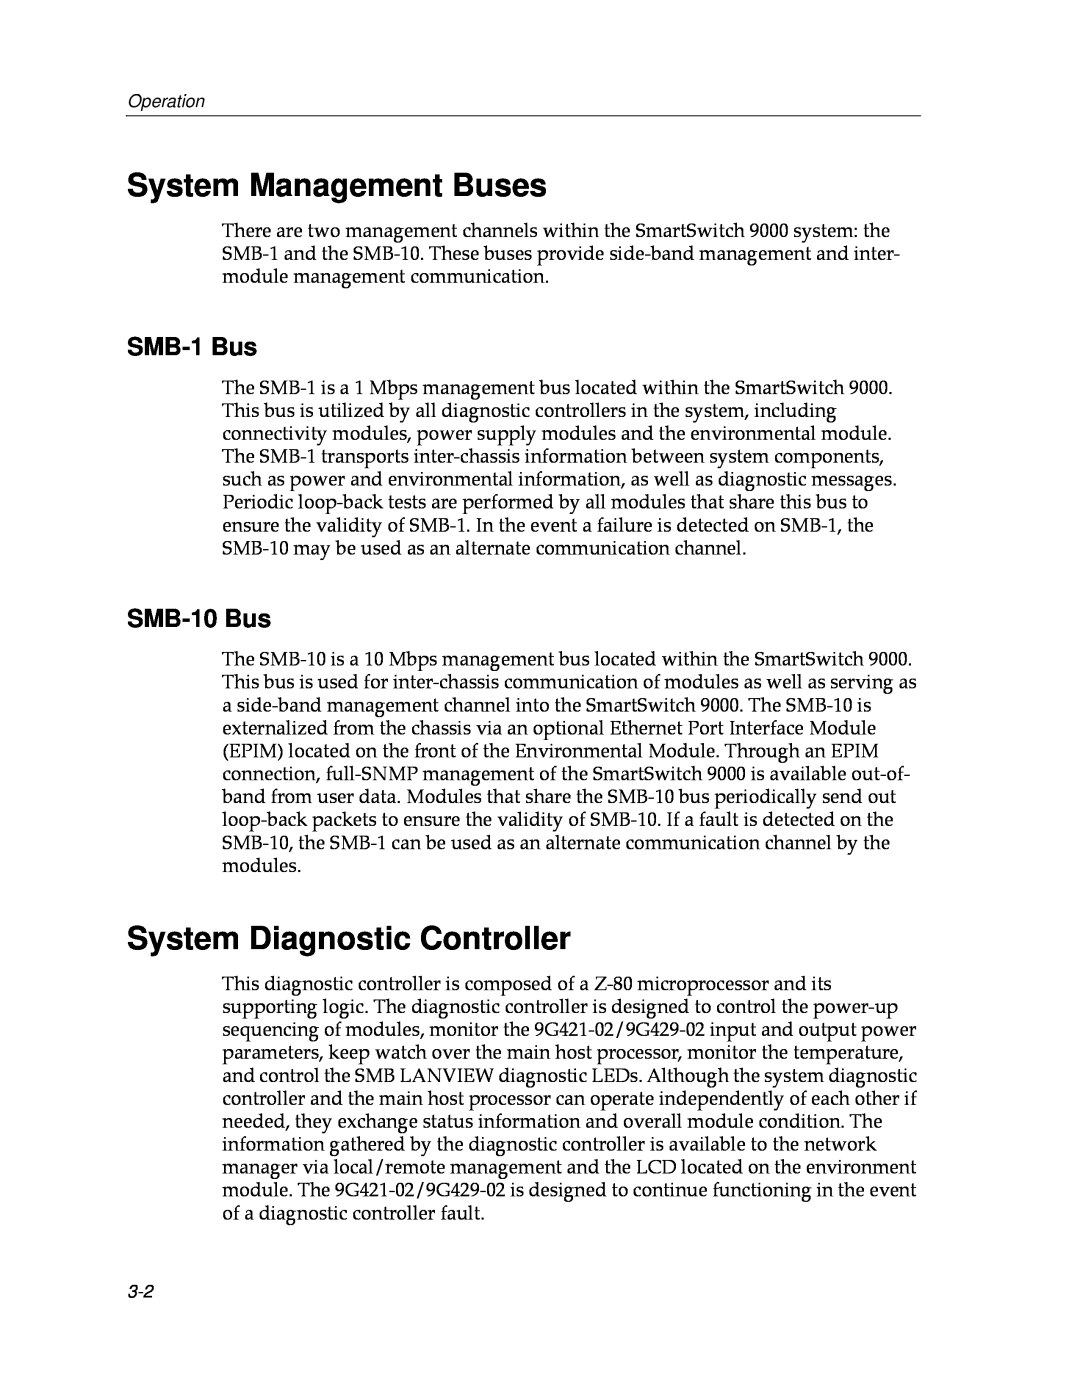 Cabletron Systems 9000 manual System Management Buses, System Diagnostic Controller, SMB-1 Bus, SMB-10 Bus 